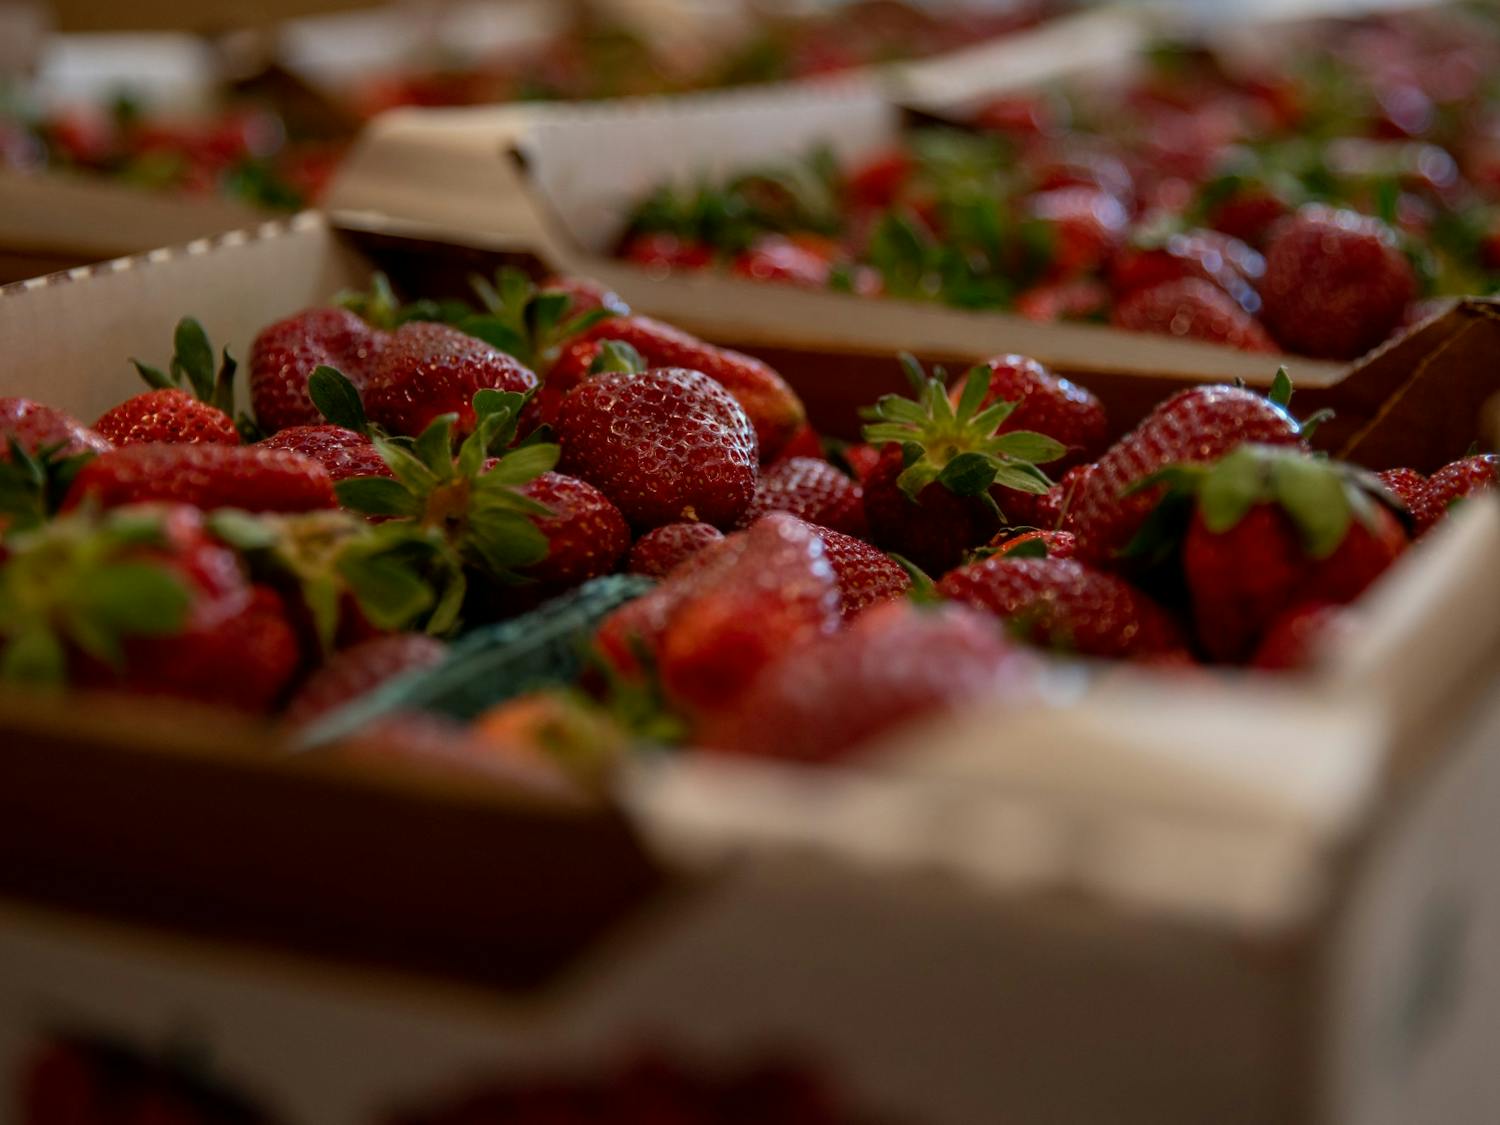 Strawberries wait to be bought at Jean's Neighborhood Market in Apex. As the weather warms, berry picking in the Chapel Hill area becomes a popular activity.